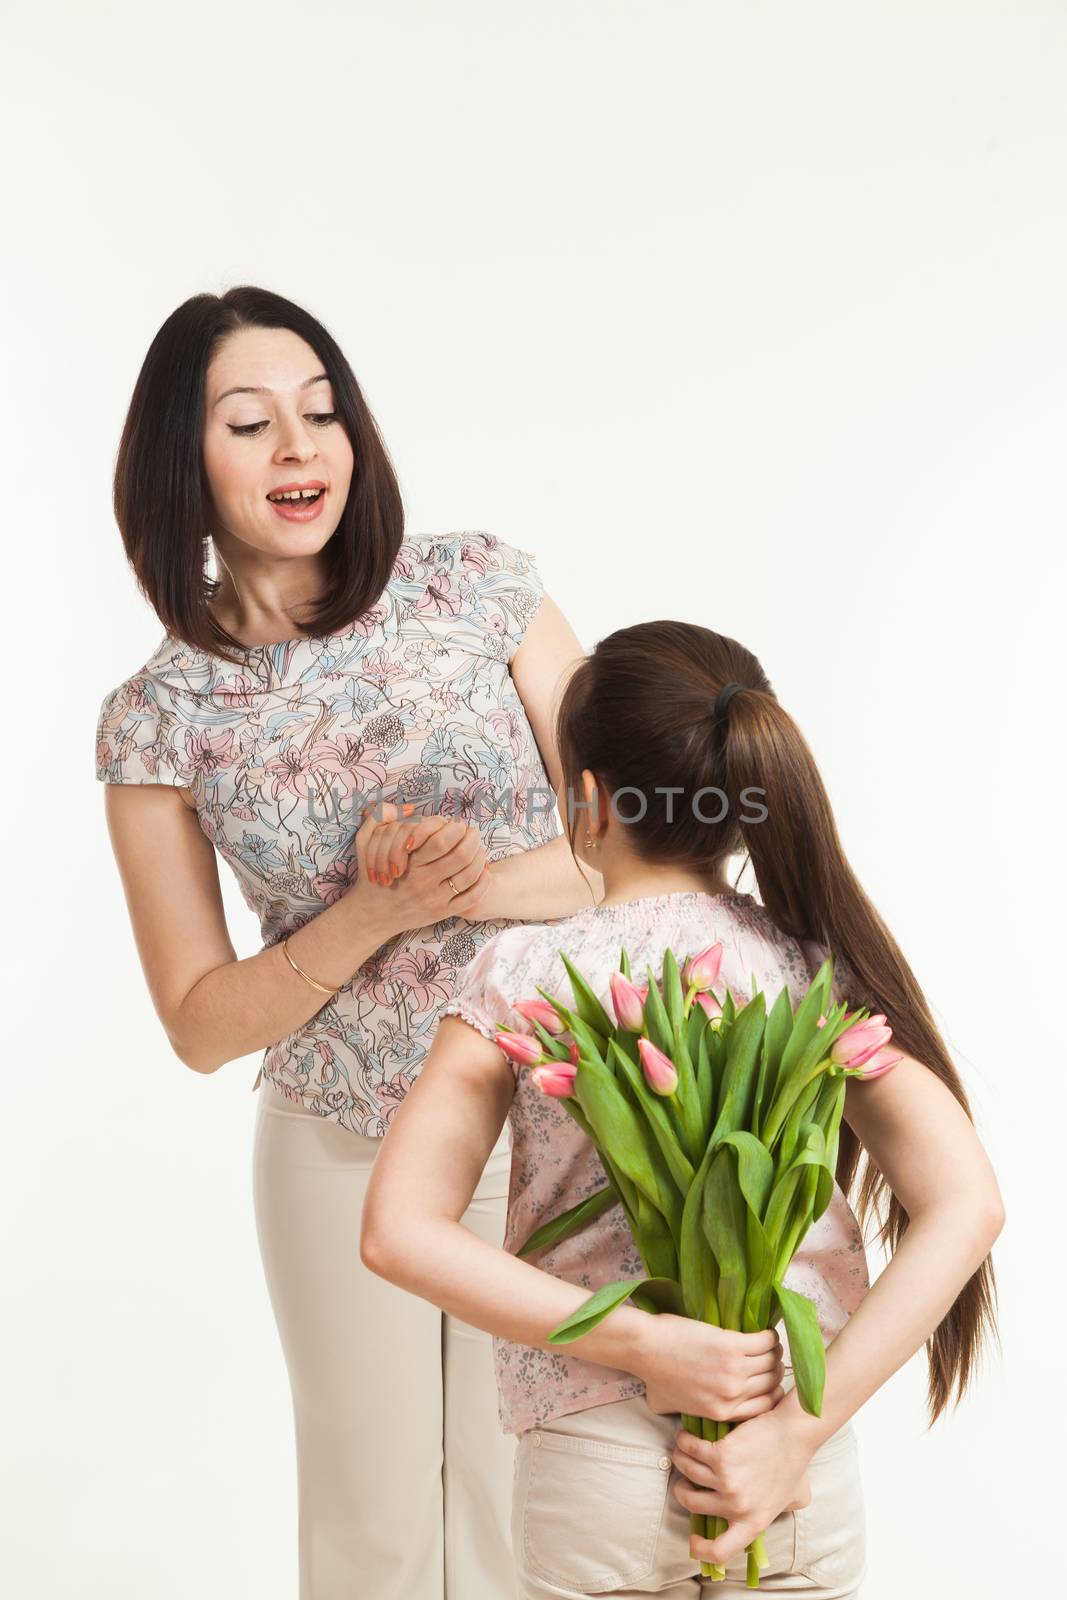 the girl hides a bouquet of flowers for mother by sveter